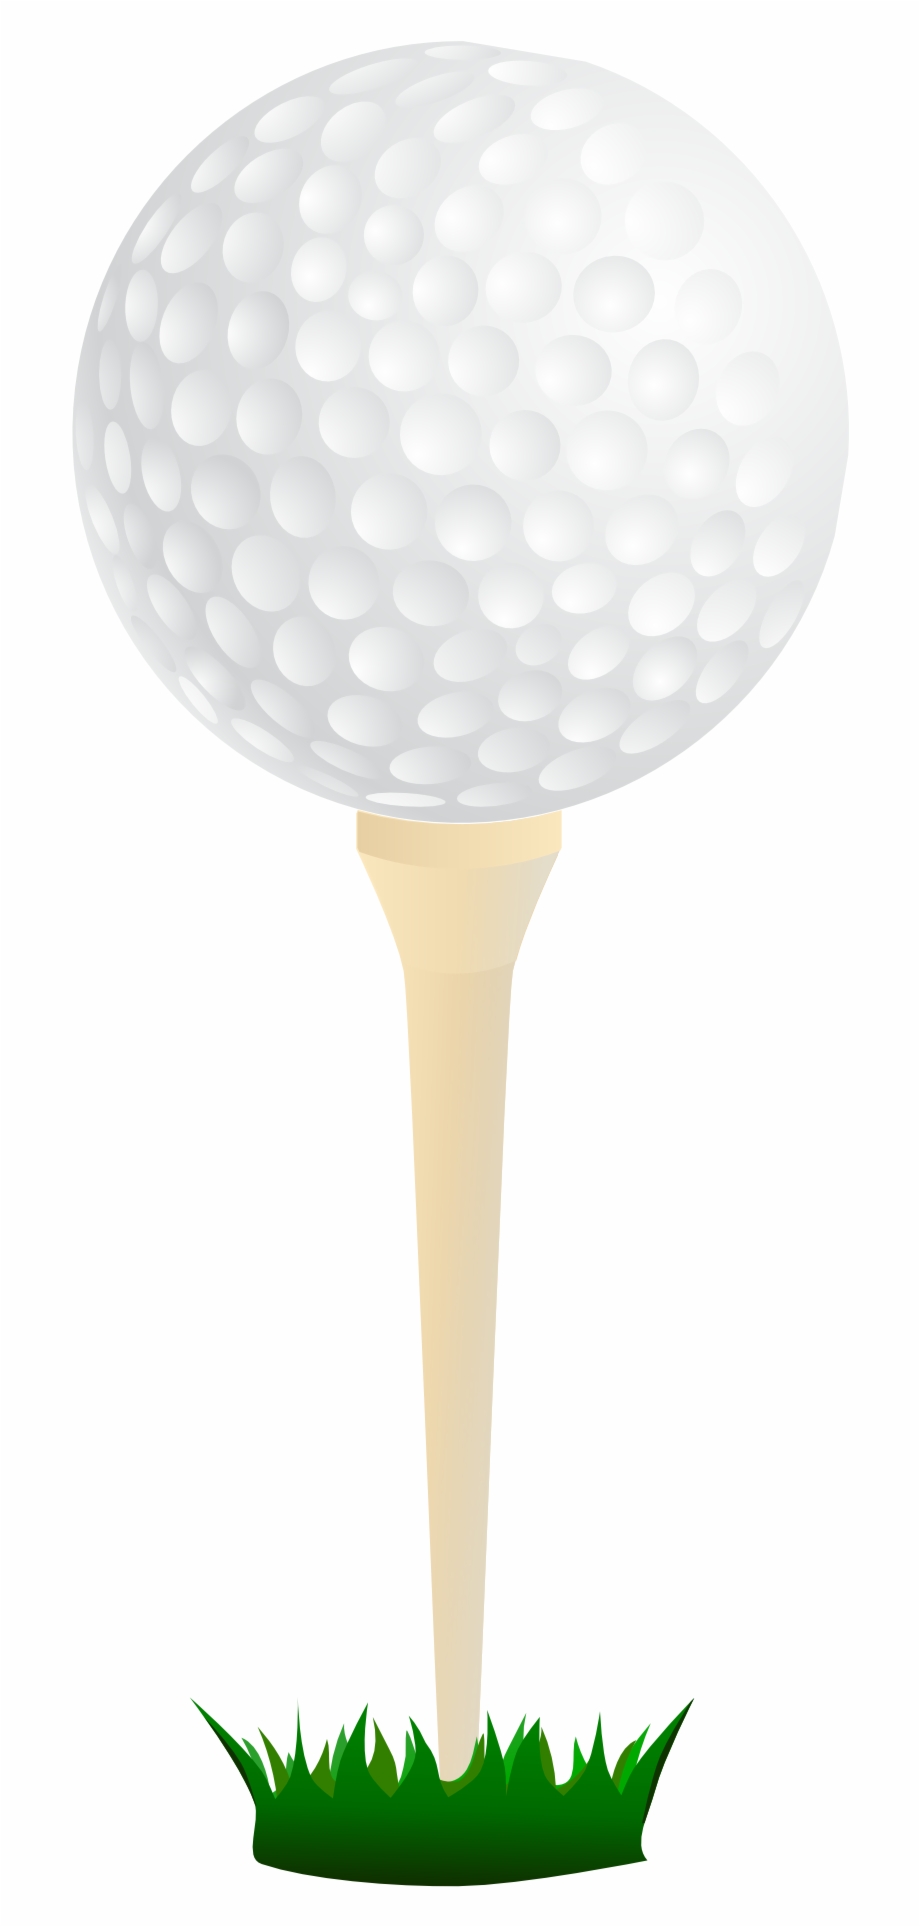 Free Golf Clipart Transparent, Download Free Golf Clipart Transparent ...